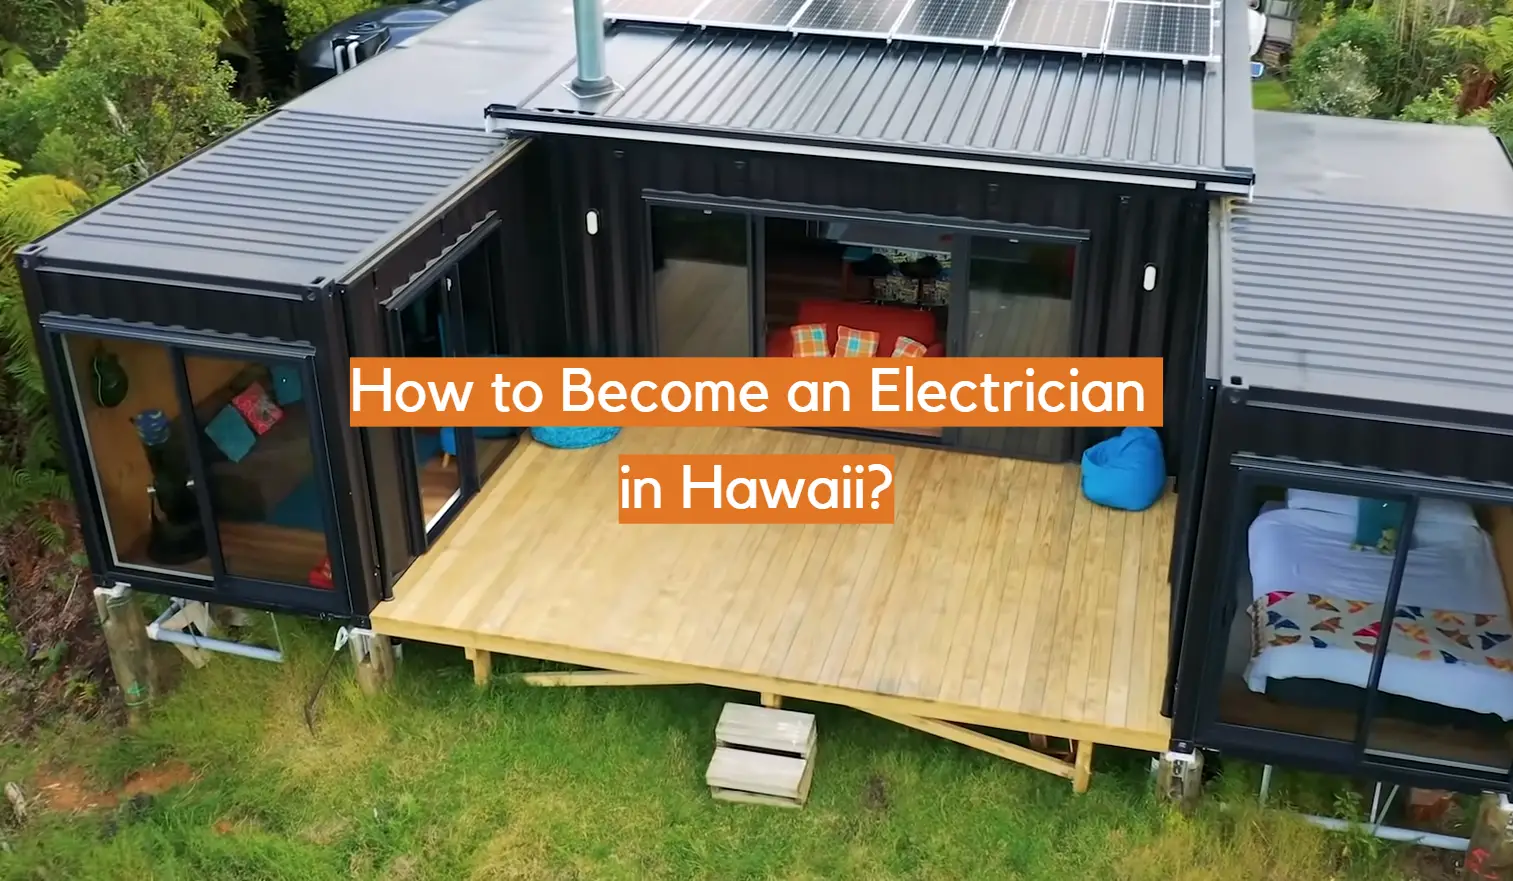 How to Become an Electrician in Hawaii?